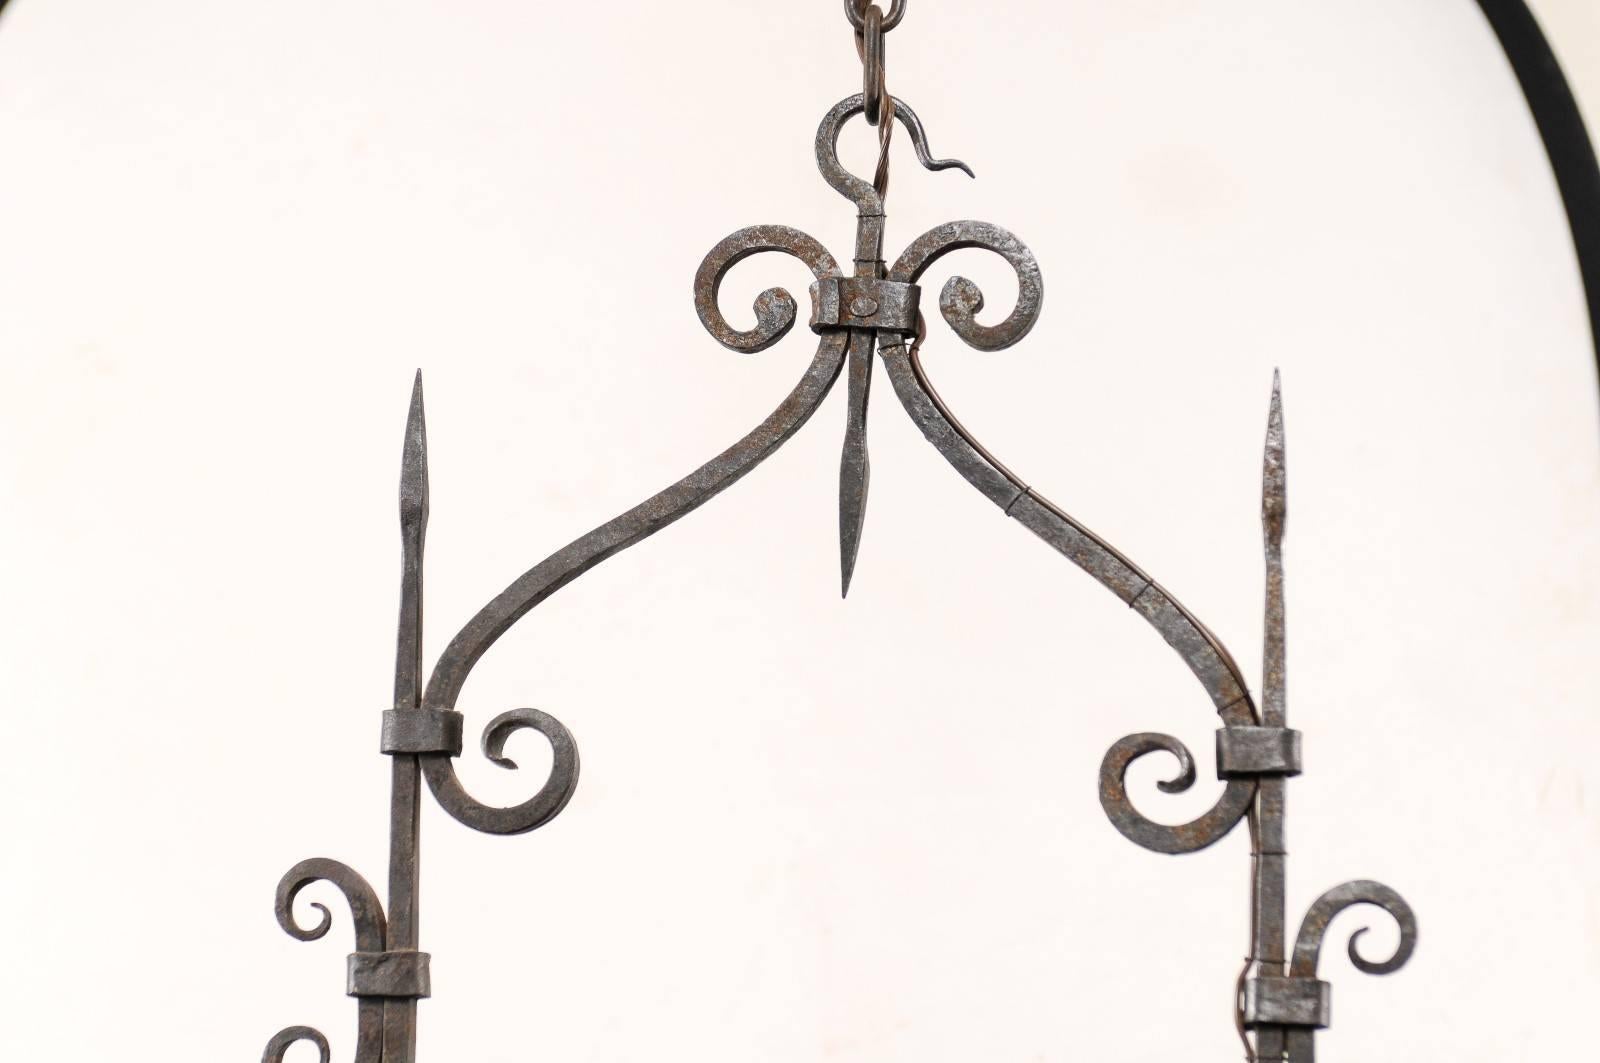 Metal French Single Light Scrolled Hand-Forged Iron Chandelier, Midcentury, Vintage